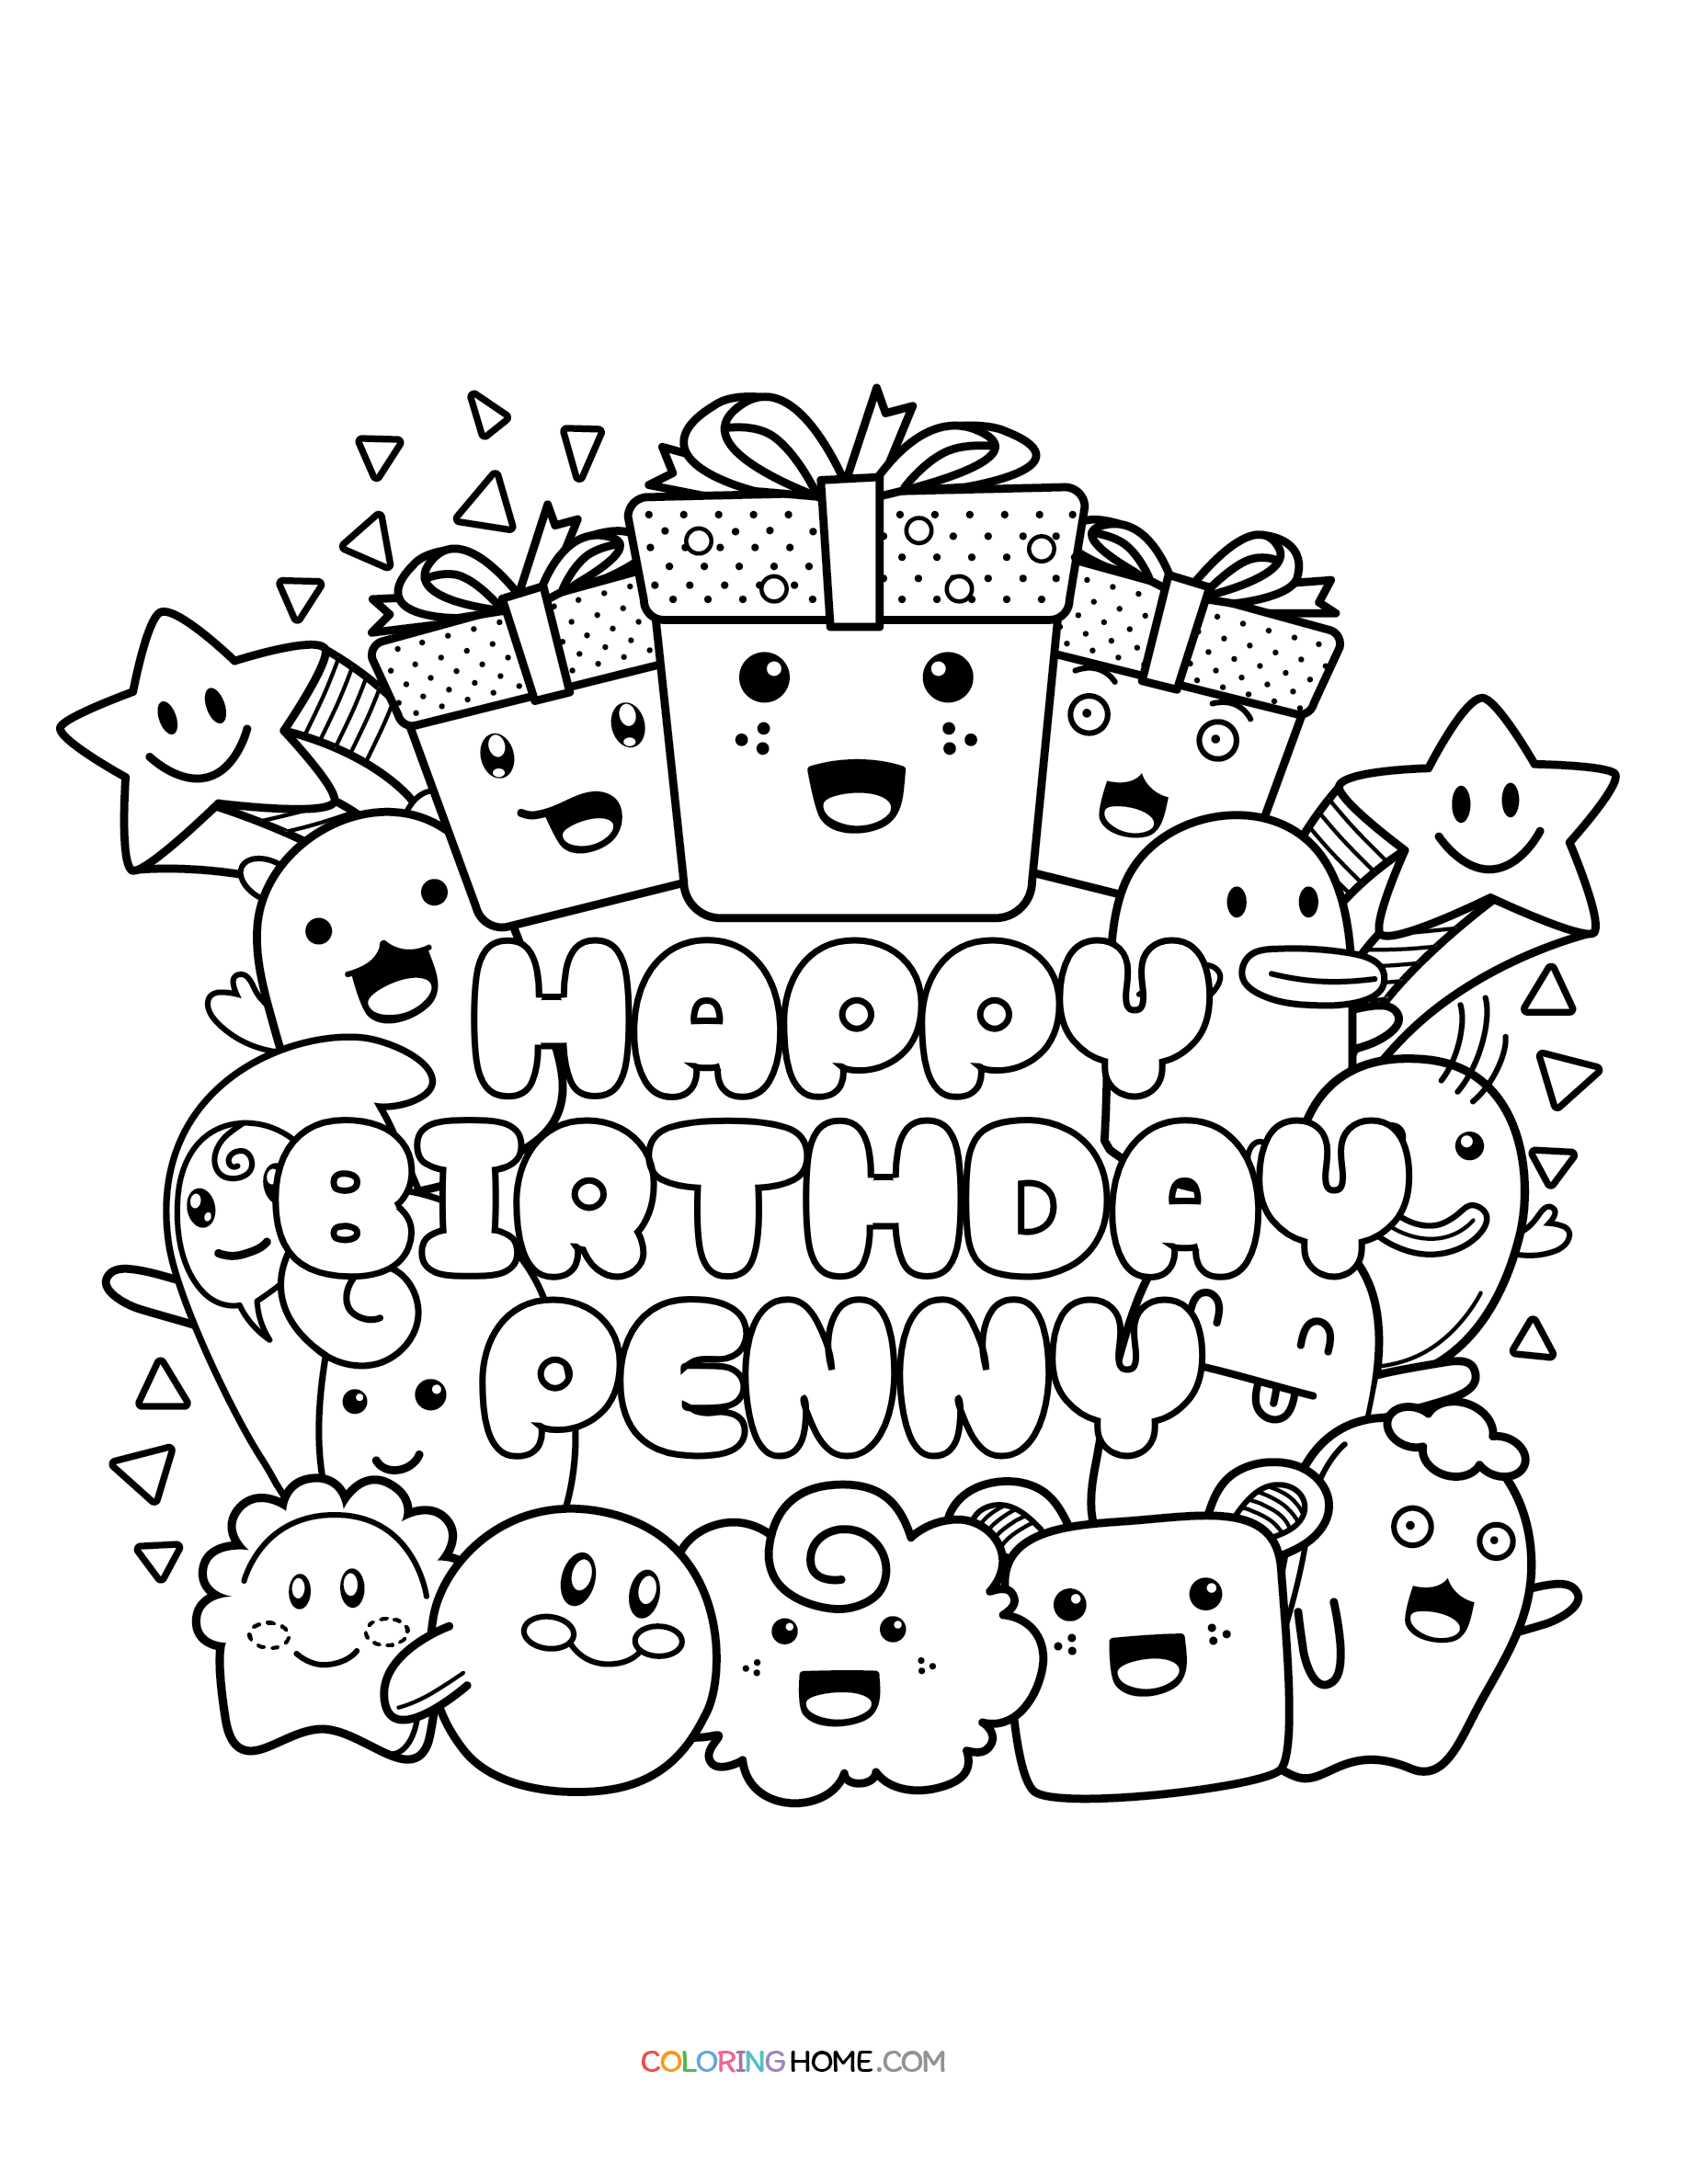 Happy Birthday Penny coloring page